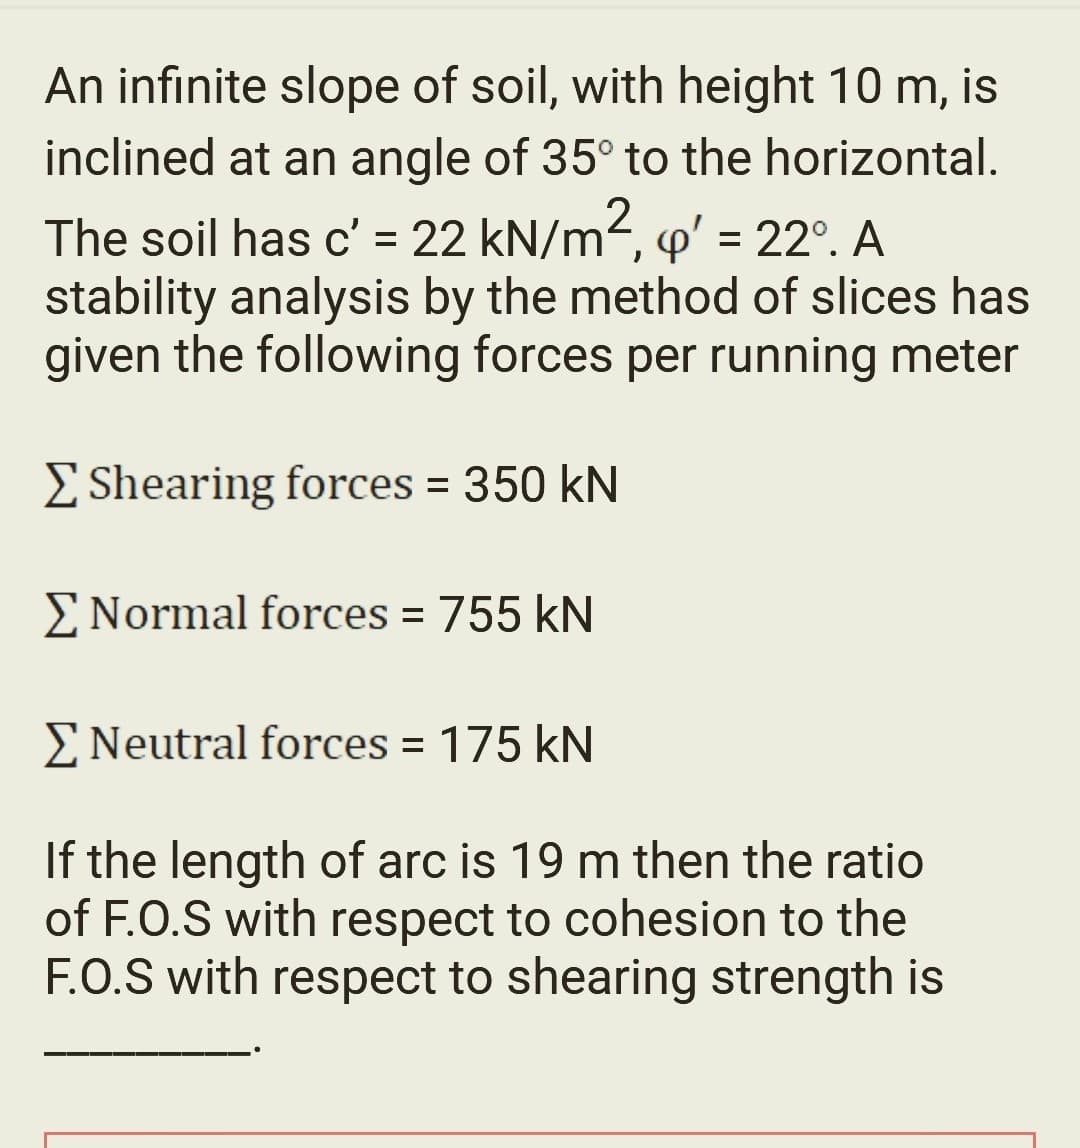 An infinite slope of soil, with height 10 m, is
inclined at an angle of 35° to the horizontal.
The soil has c' = 22 kN/m², ' = 22º. A
stability analysis by the method of slices has
given the following forces per running meter
Σ Shearing forces = 350 kN
Σ Normal forces = 755 kN
Σ Neutral forces = 175 kN
If the length of arc is 19 m then the ratio
of F.O.S with respect to cohesion to the
F.O.S with respect to shearing strength is